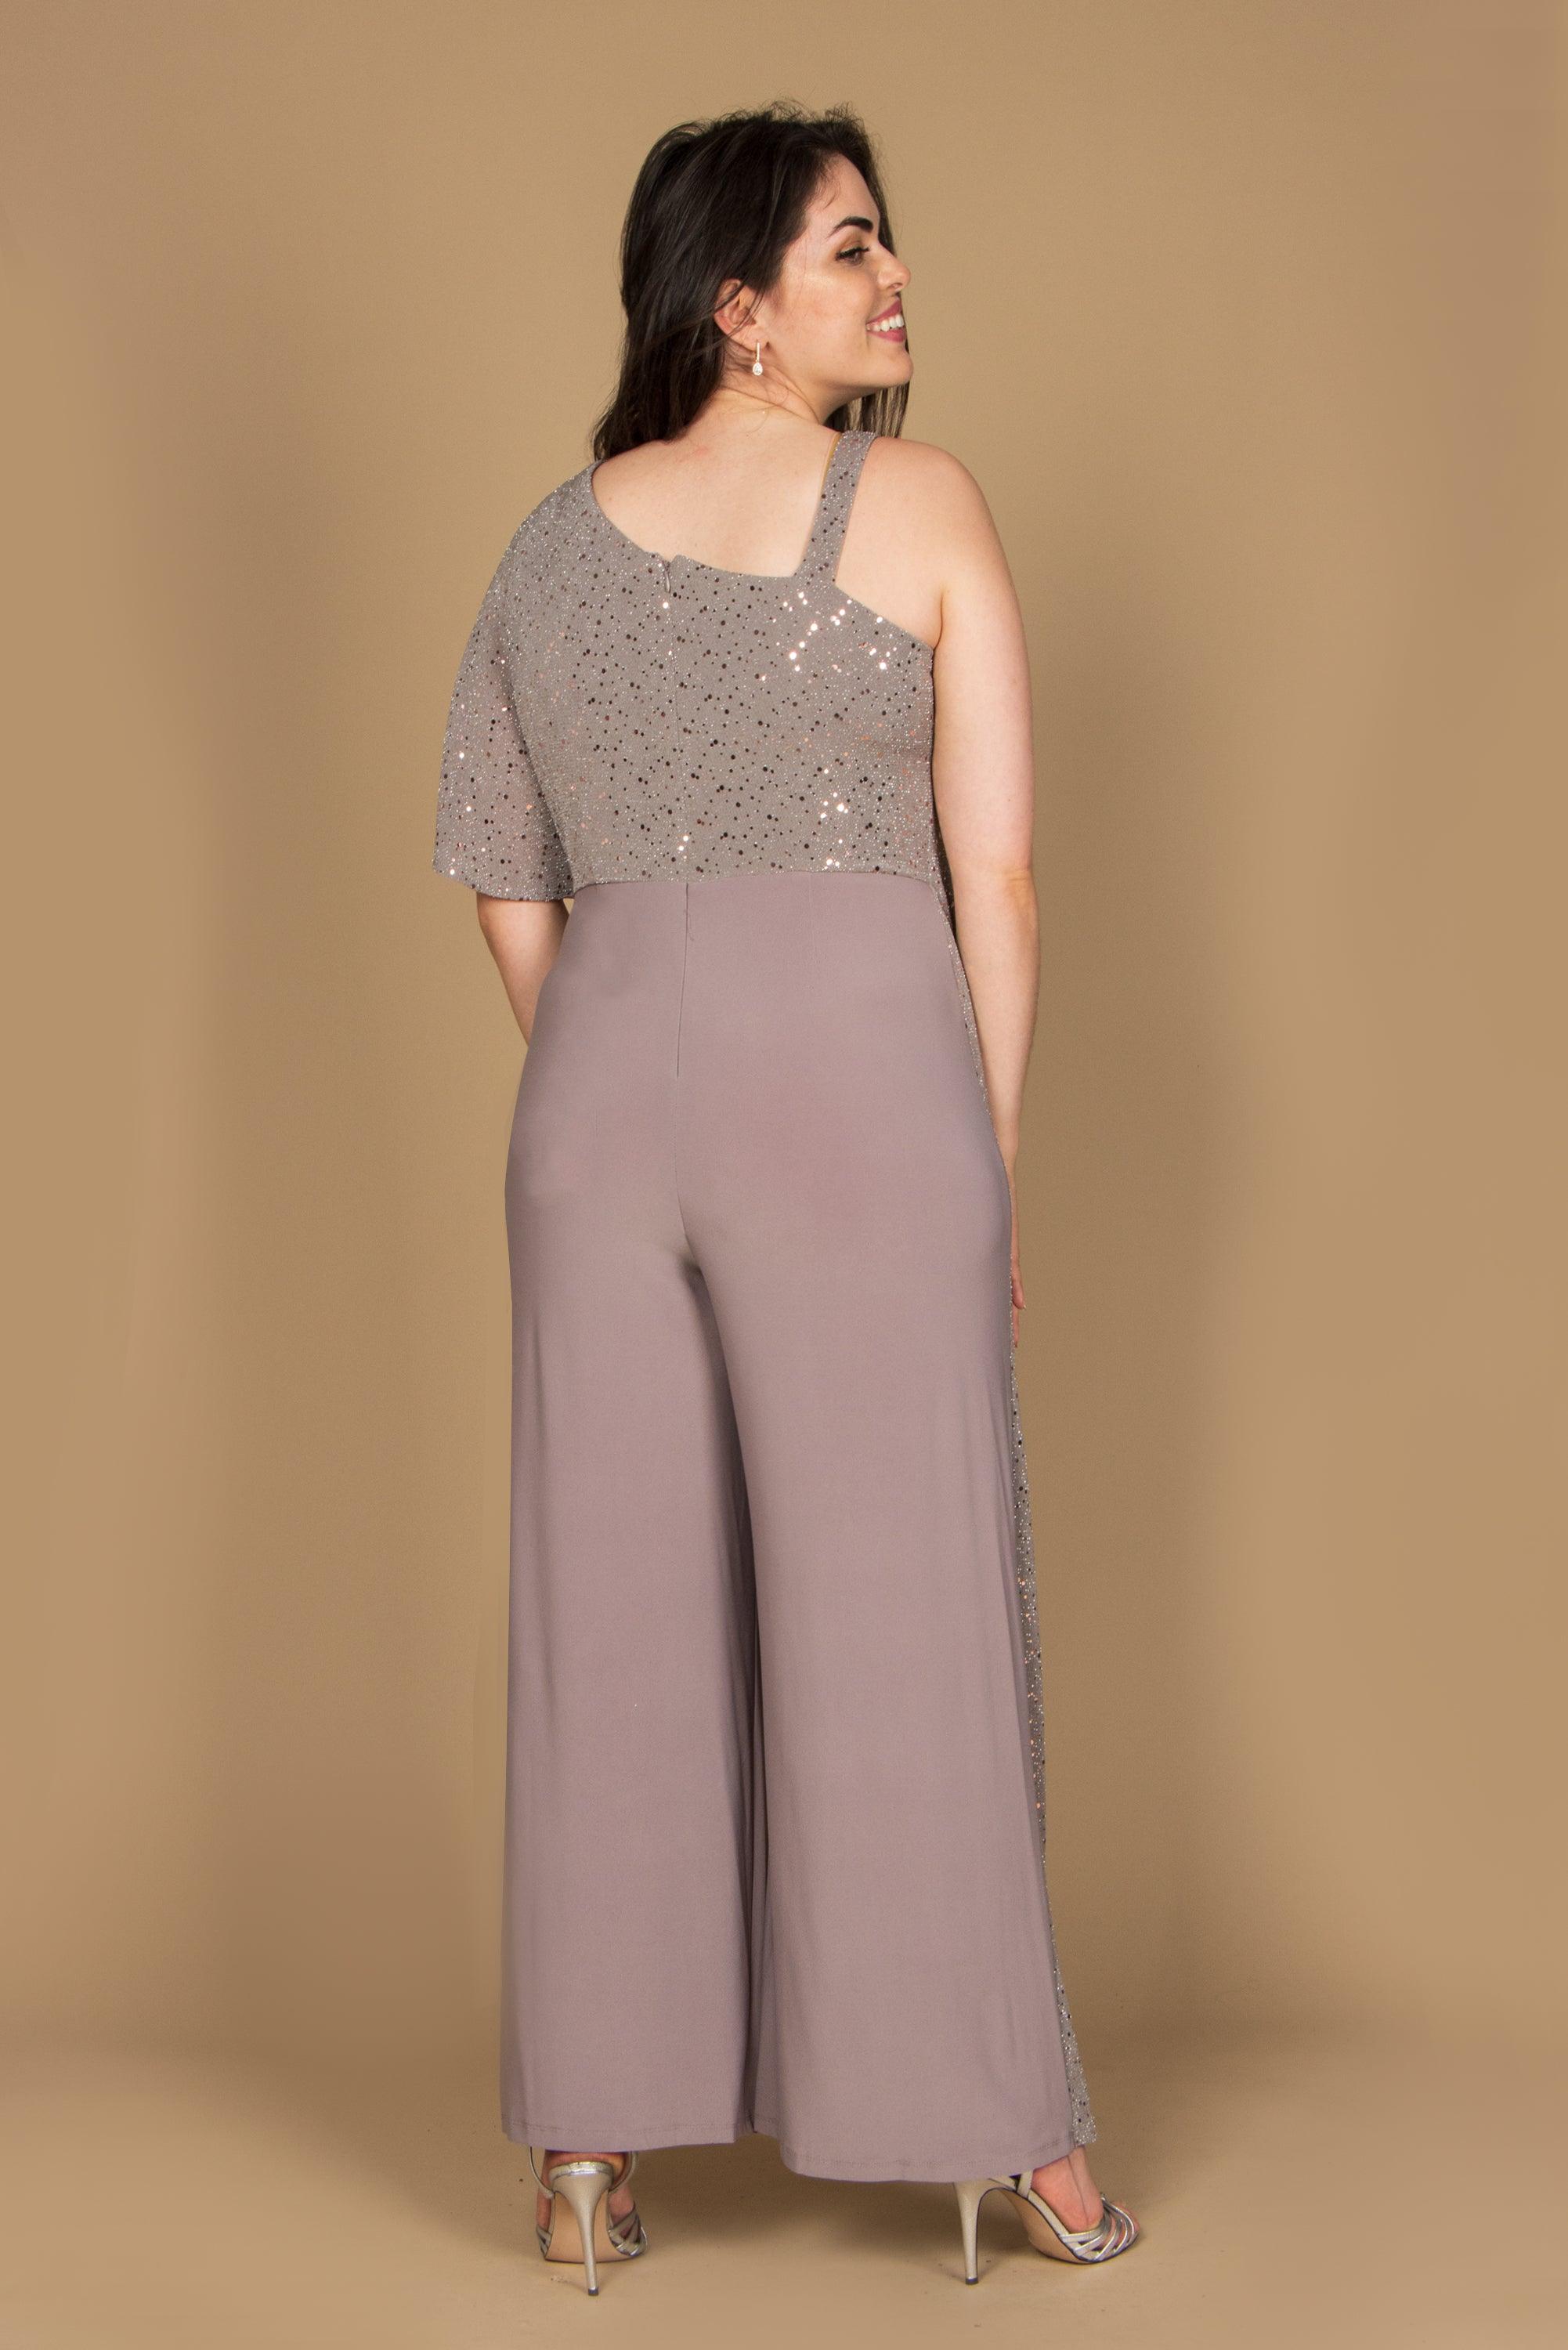 R&M Richards Jumpsuit Pant Sequined Overlay 3096 - The Dress Outlet